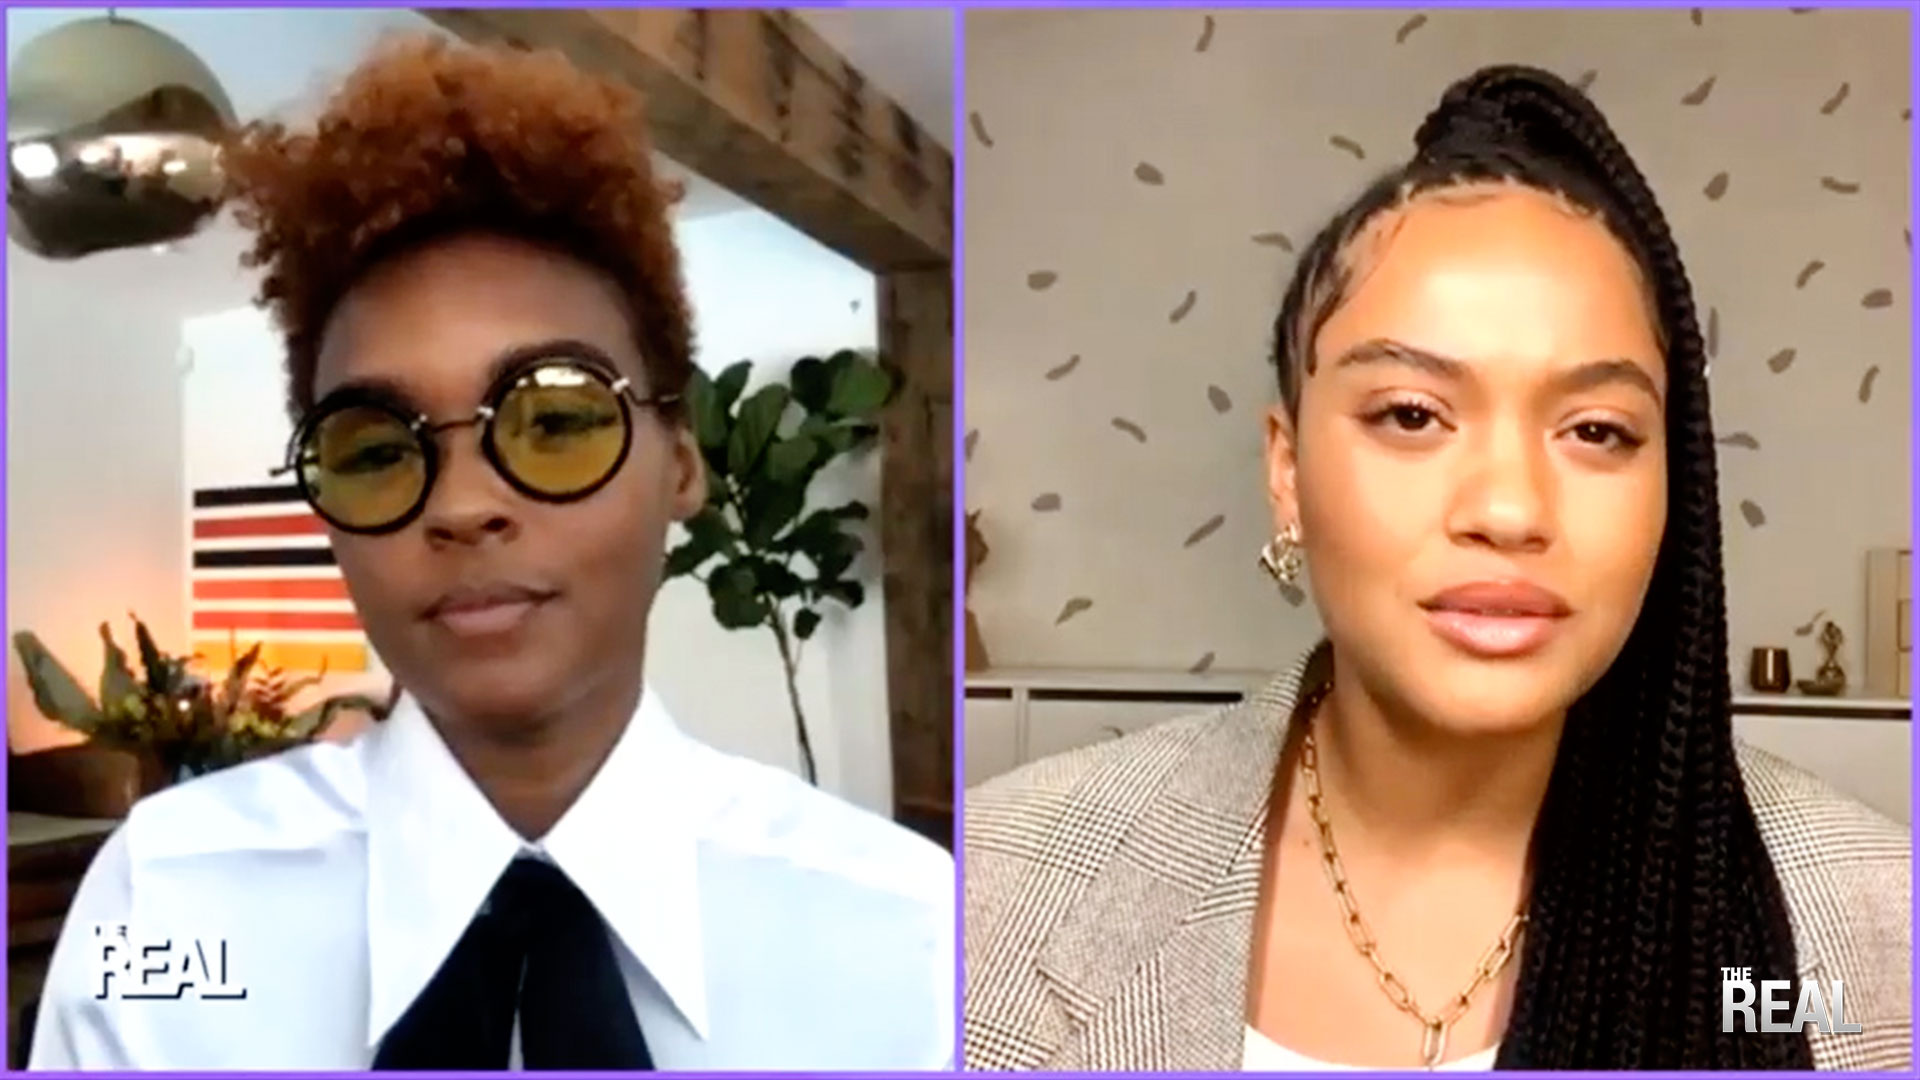 The Real: Janelle Monaé & Kieresey Clemons Stop by!